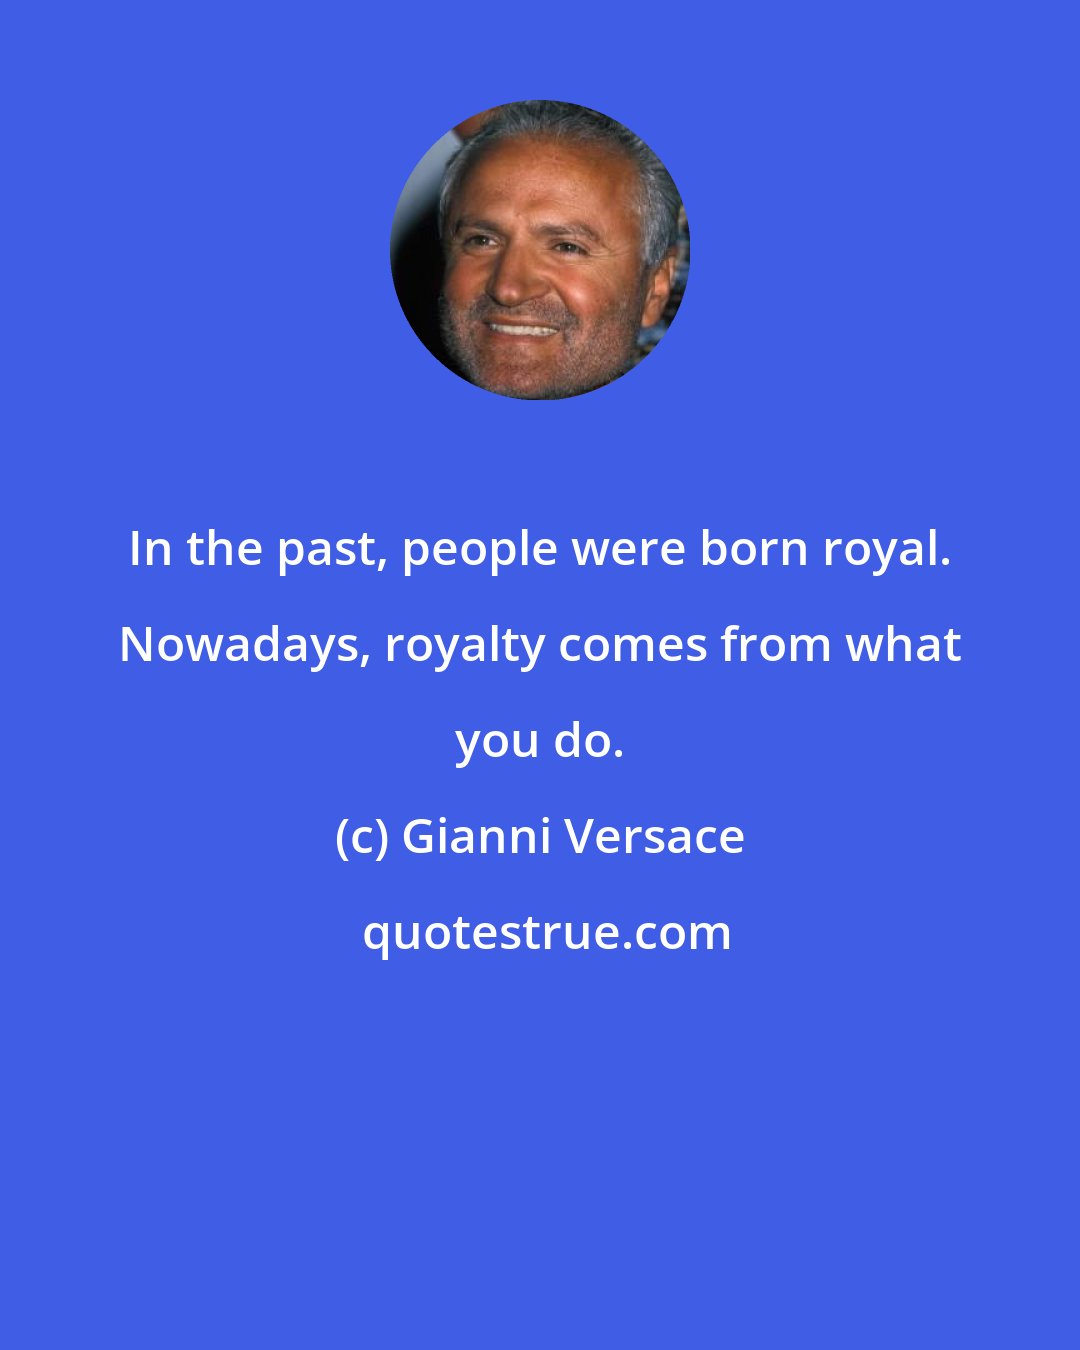 Gianni Versace: In the past, people were born royal. Nowadays, royalty comes from what you do.